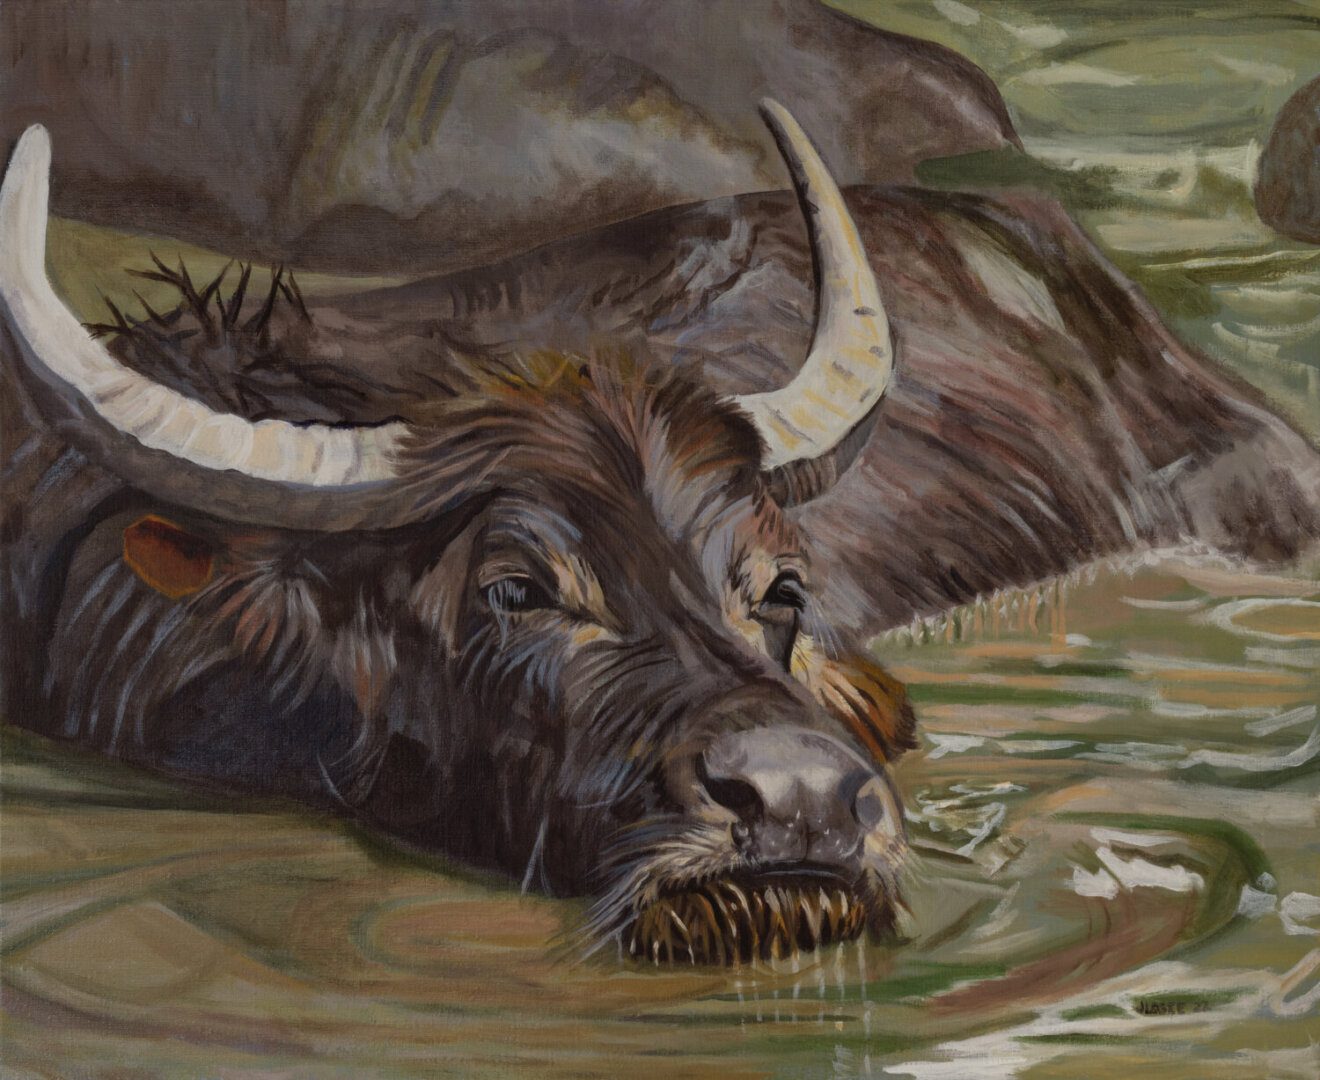 oil Painting of Water Buffalo Bathing